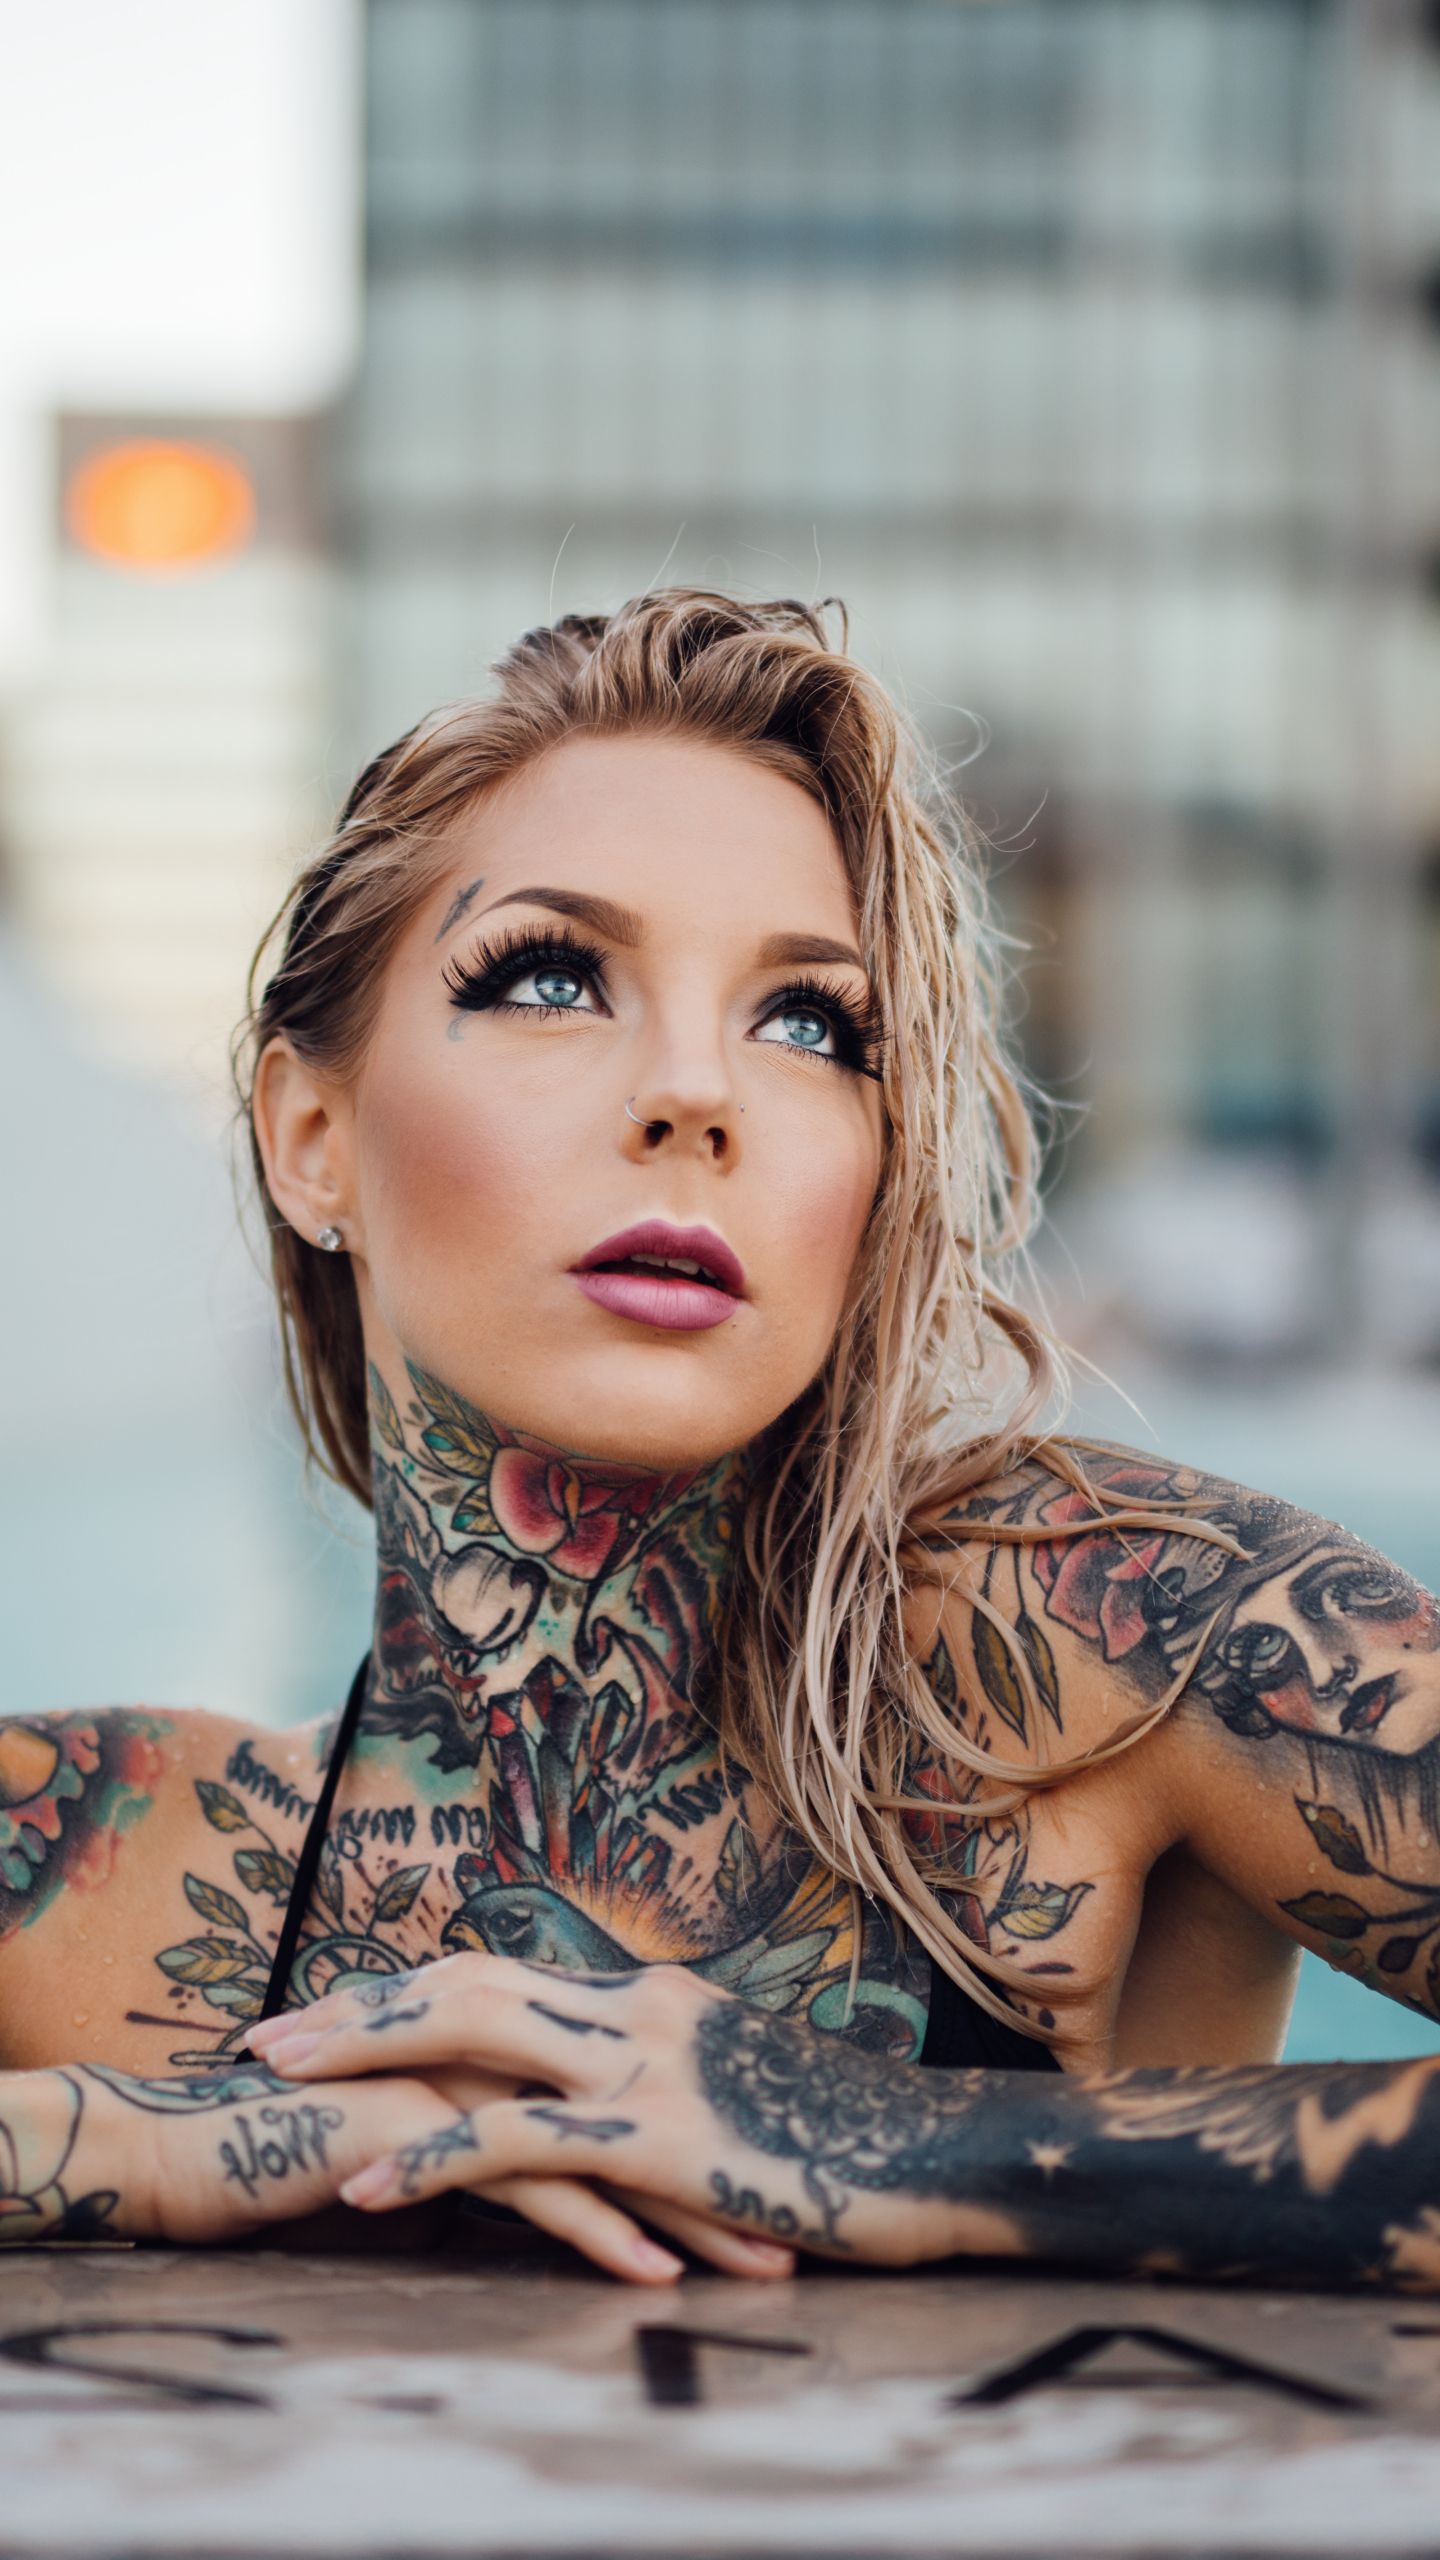 Girl Tattoo Wallpapers Wallpaper Cave 4652